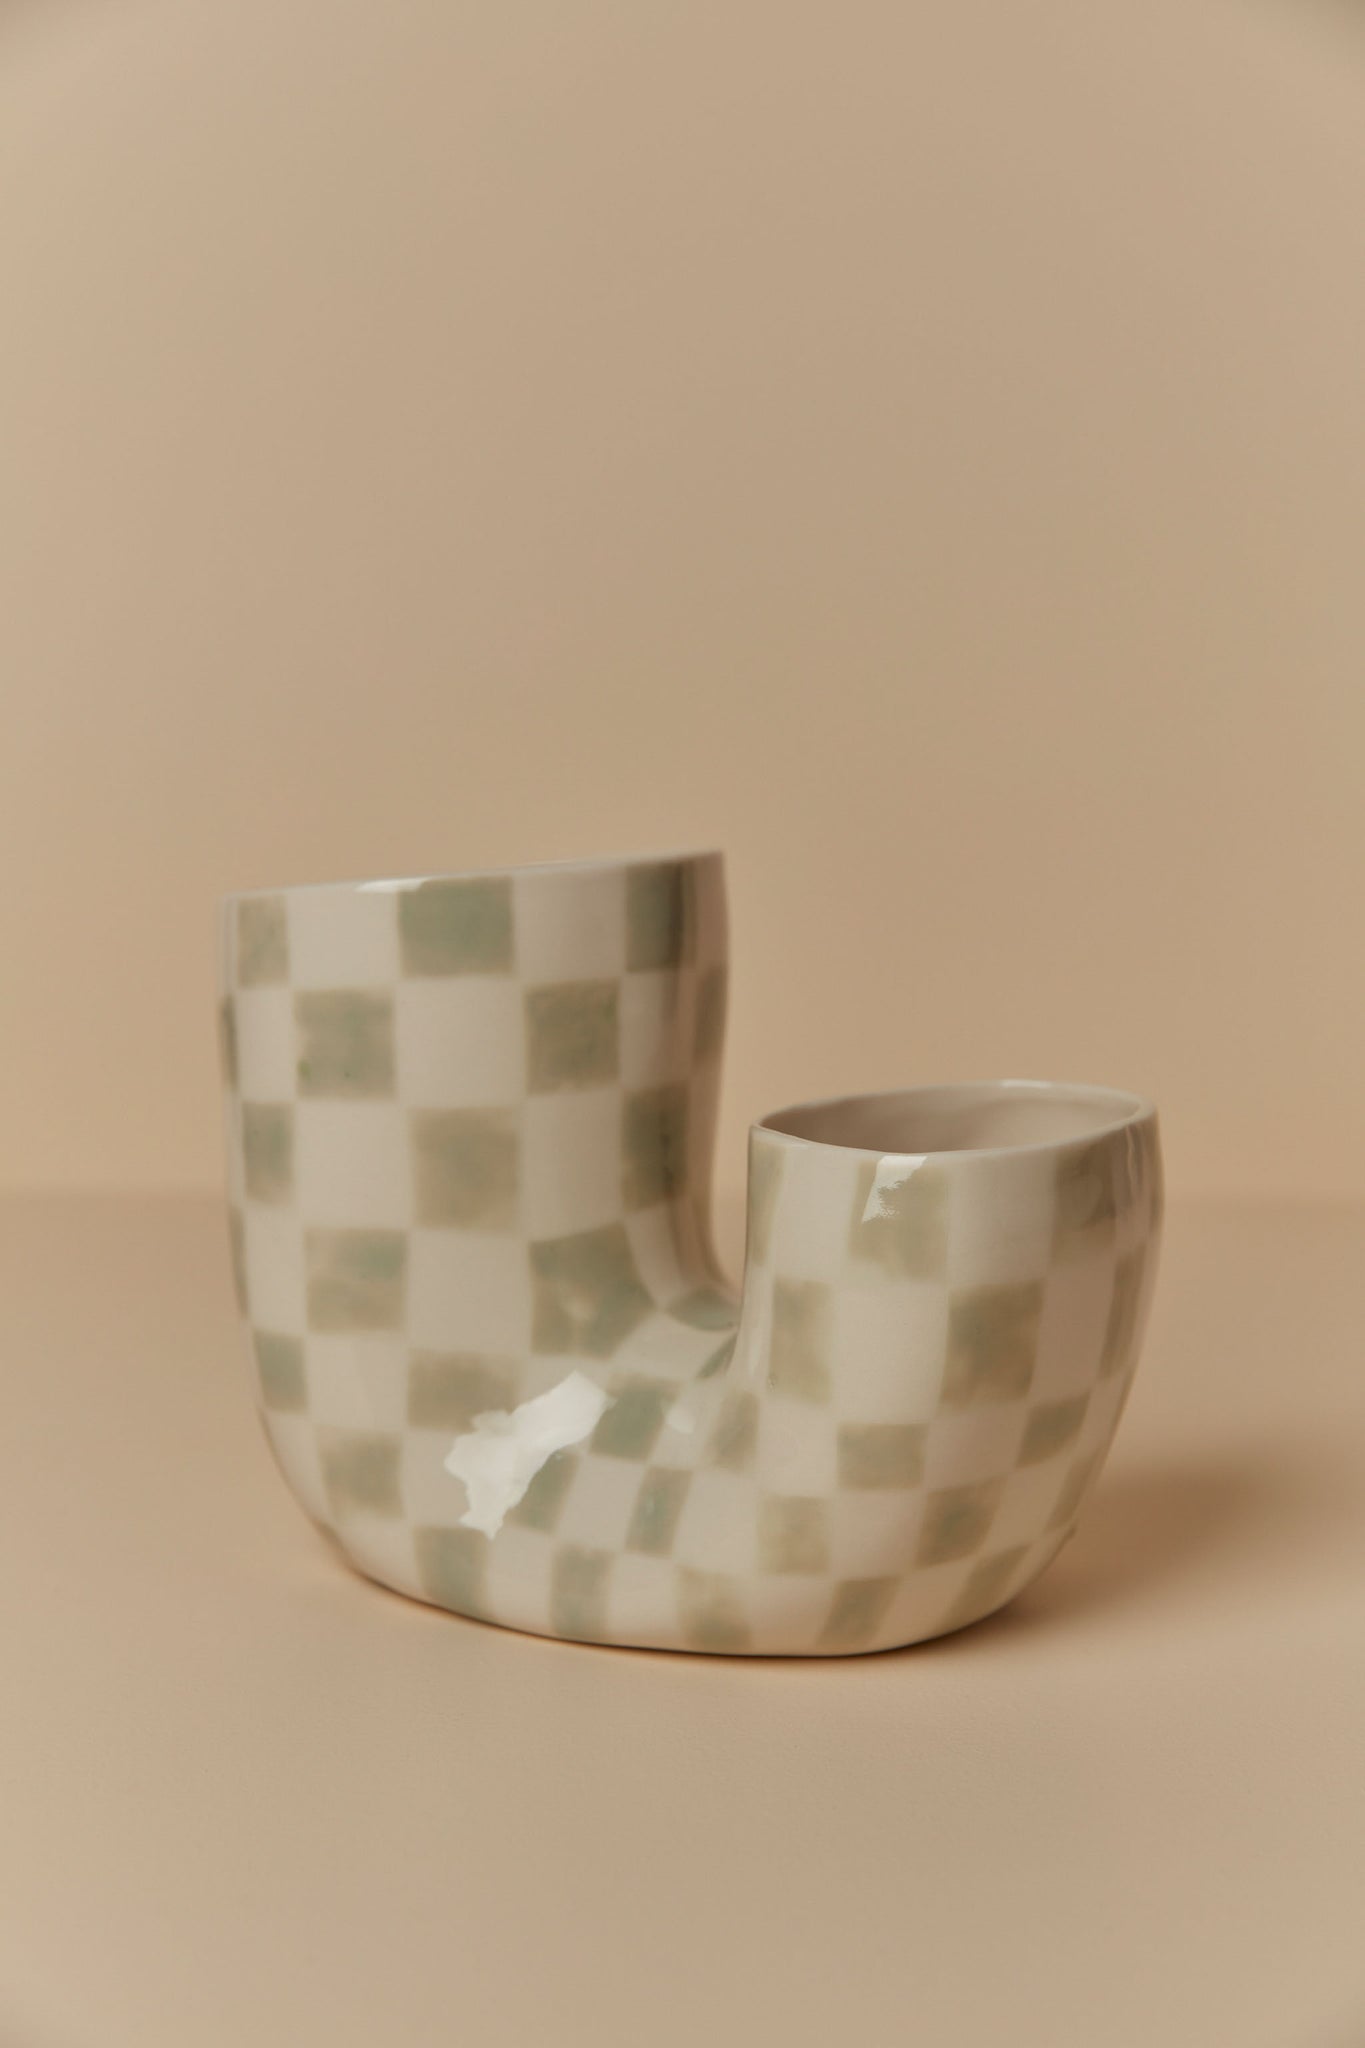 At The Table - Double Hole Vase, Mist Check